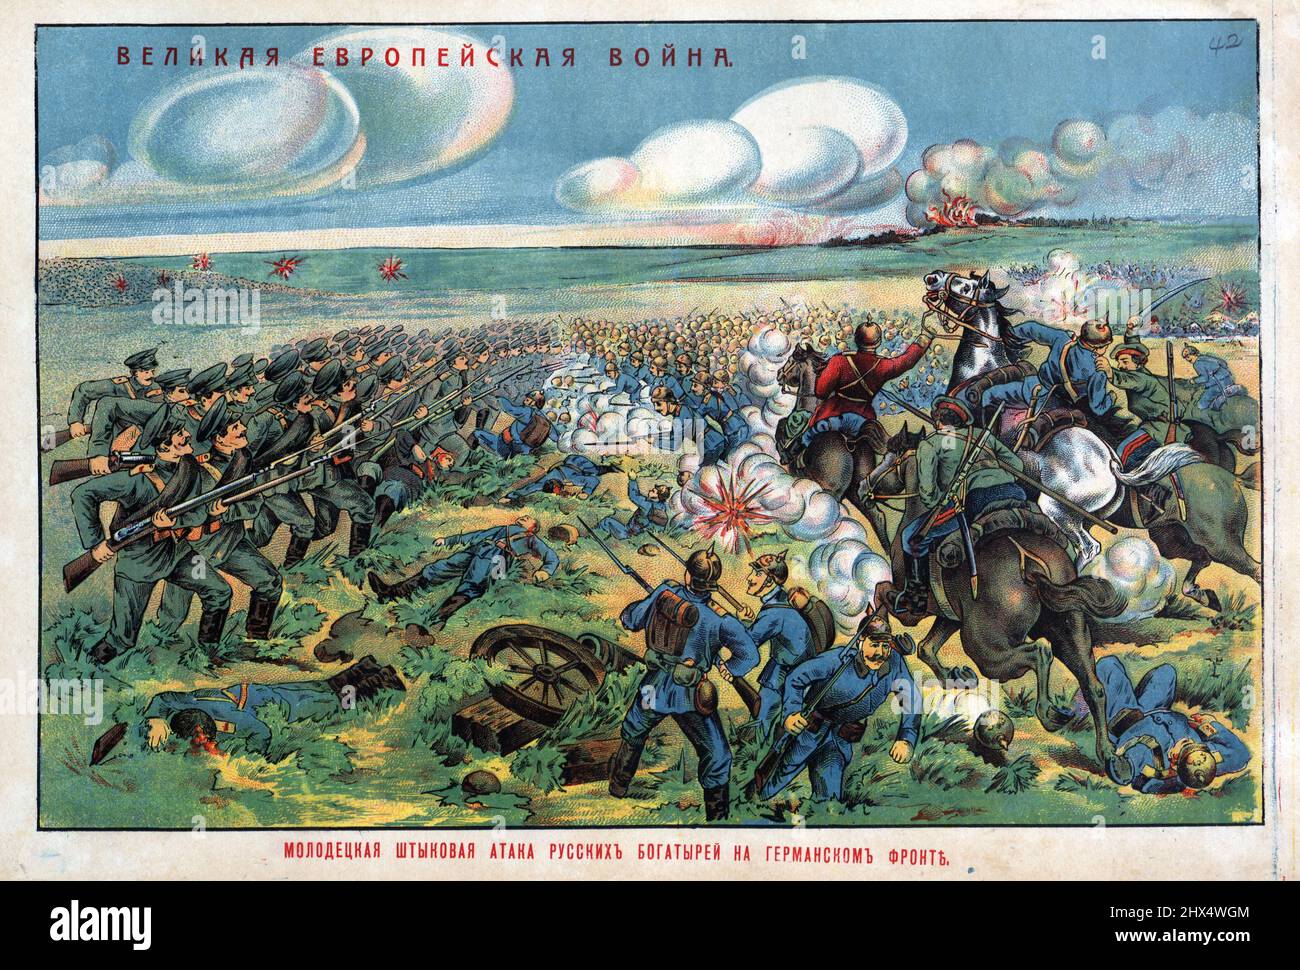 The Great European War. 1914-1915. This print showing Russian and German troops engaged in battle is from a collection of World War I lubok posters. Stock Photo